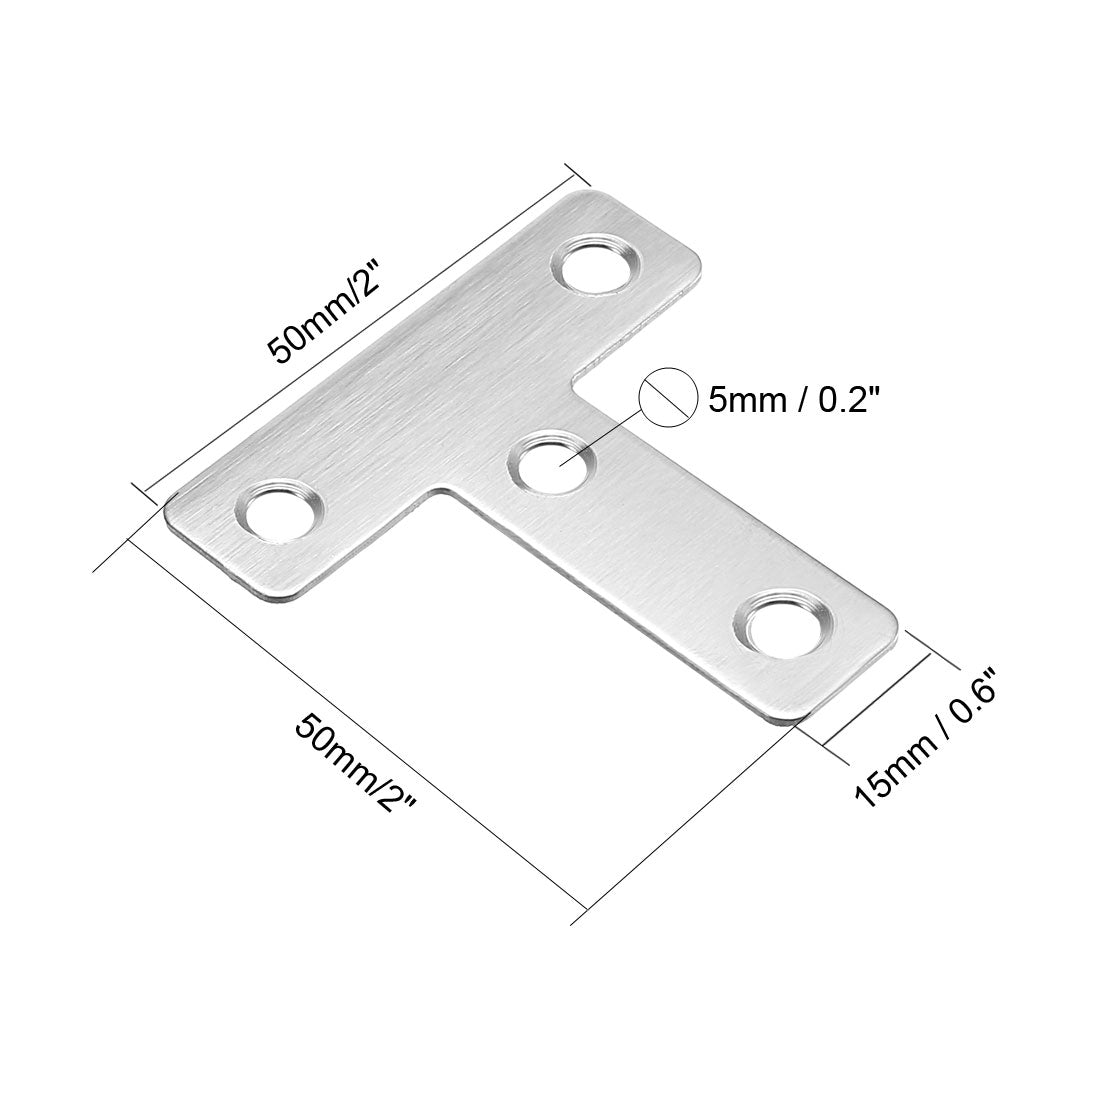 uxcell Uxcell Flat T Shape Repair Mending Plate, 50mmx50mm, Stainless steel Joining Bracket Support Brace, 12 pcs